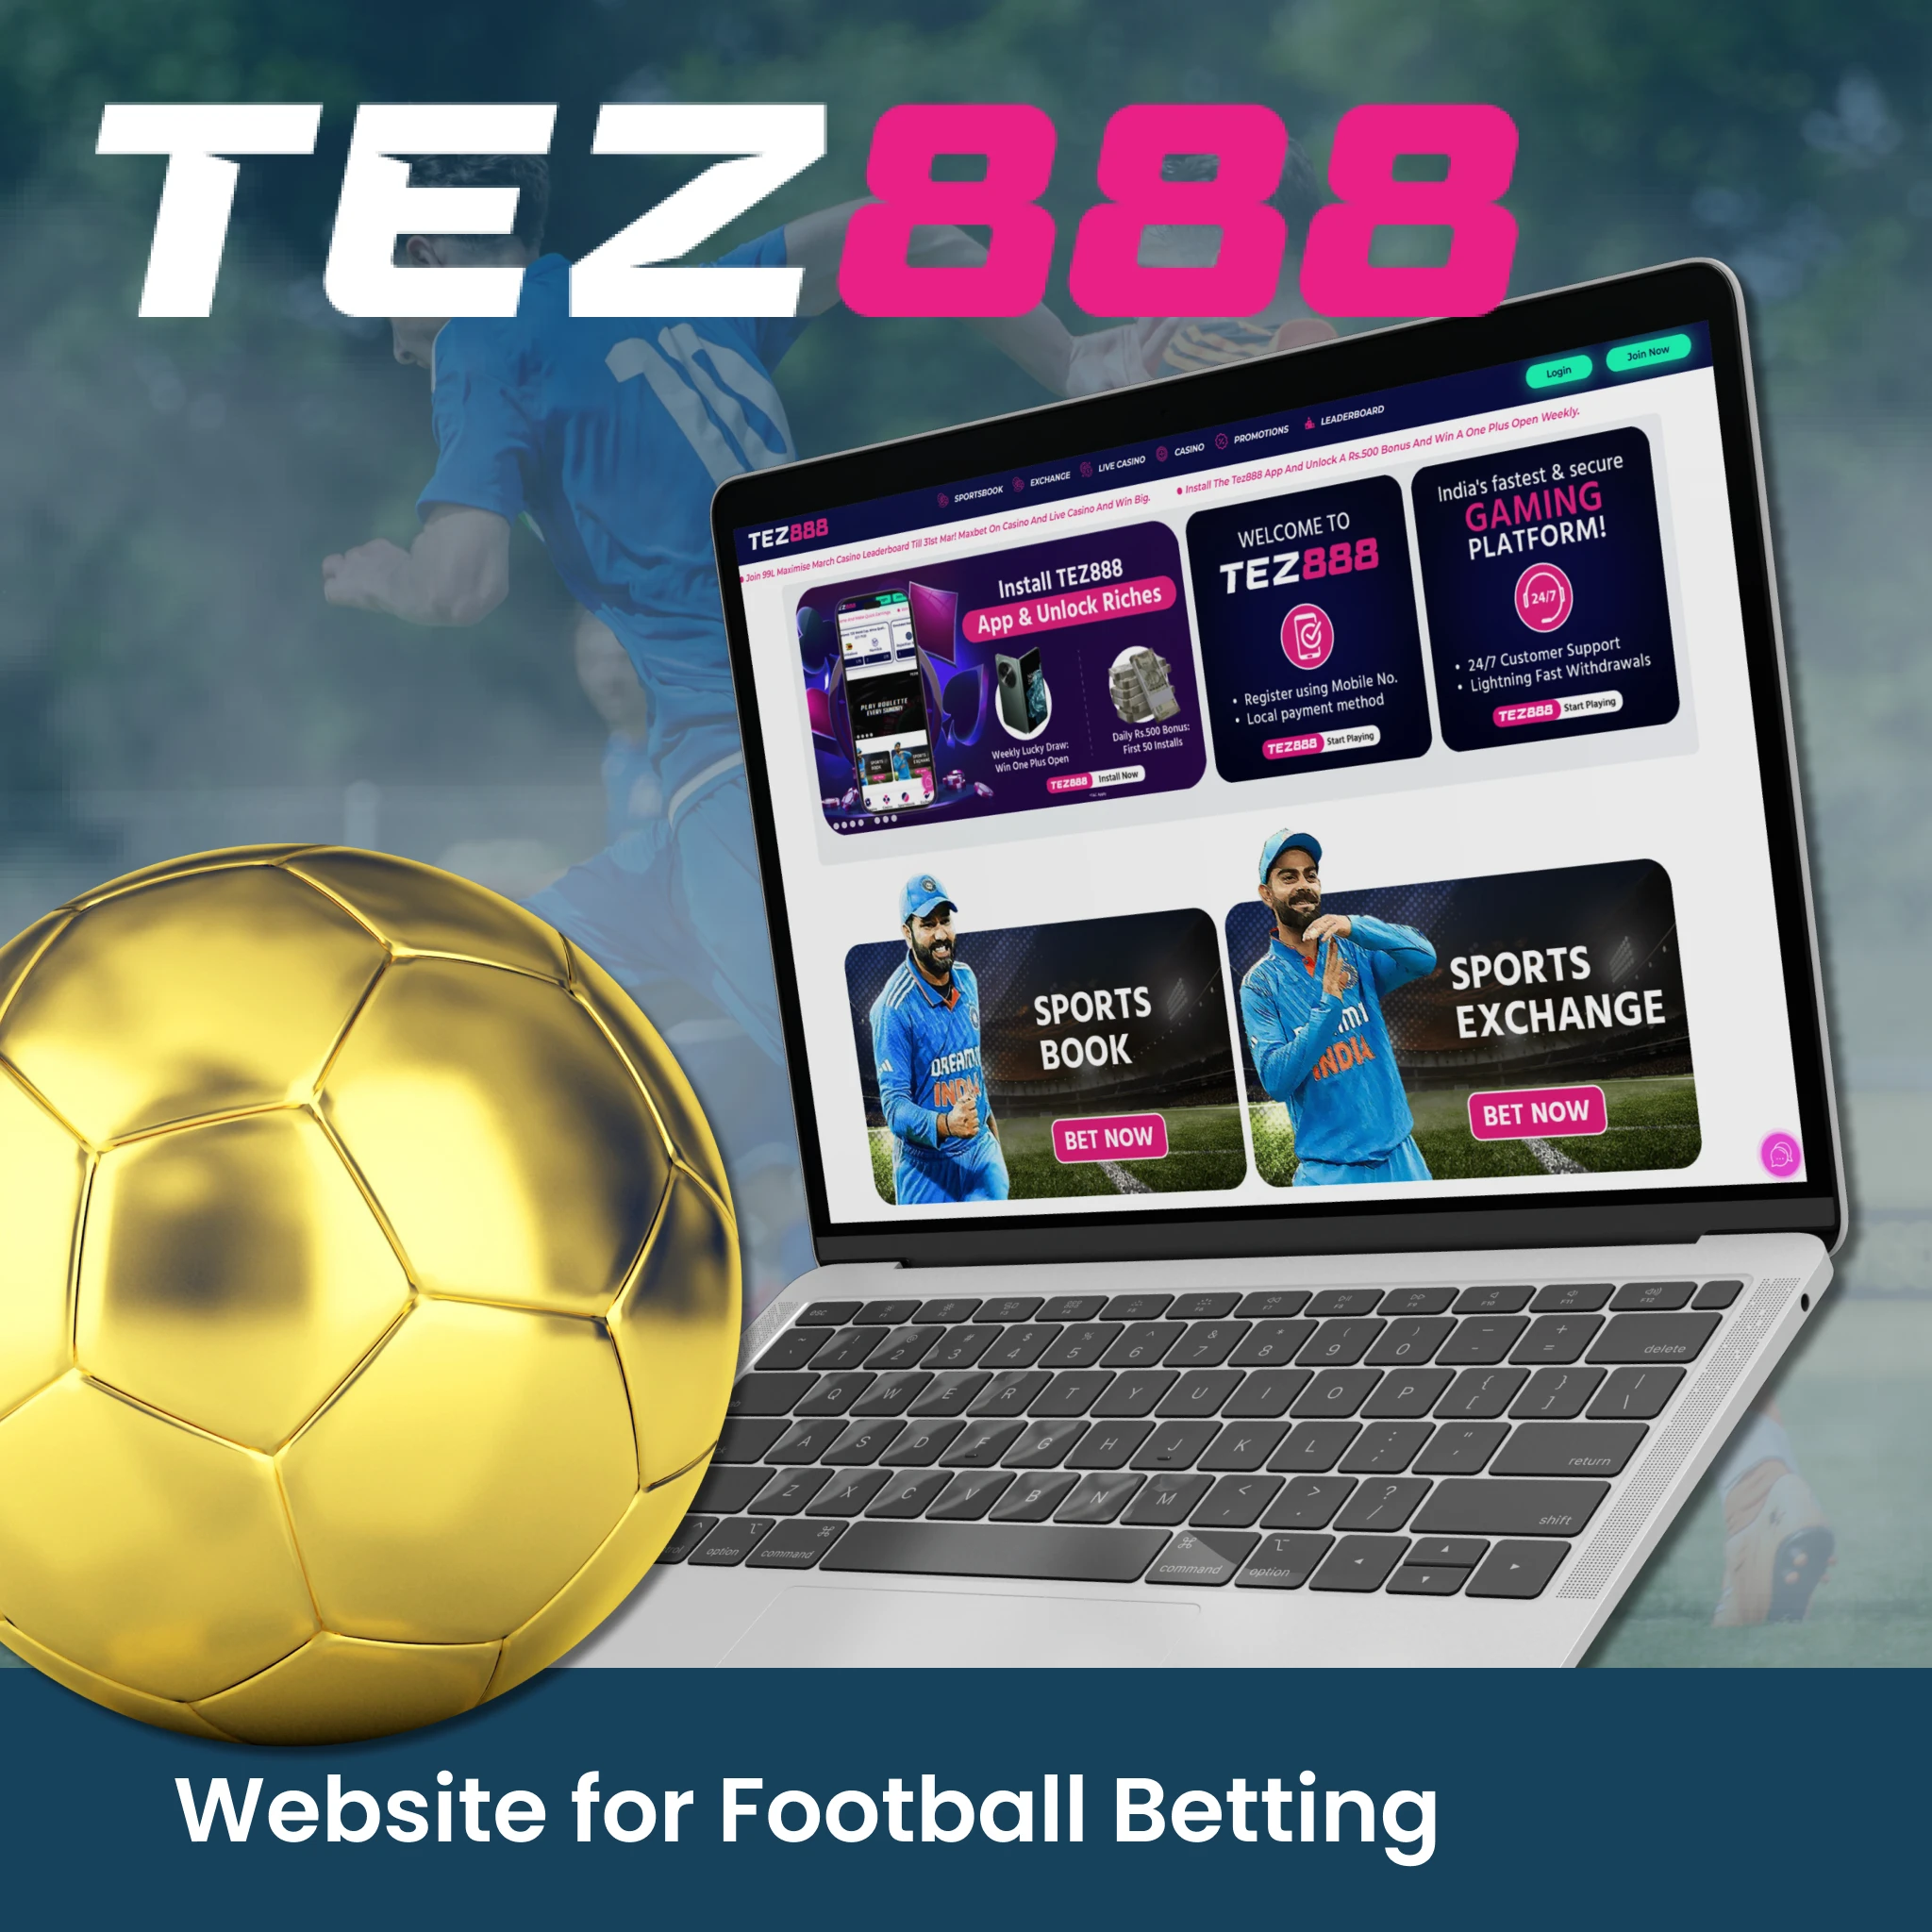 Tez888 offers an exceptional platform for football betting devotees.